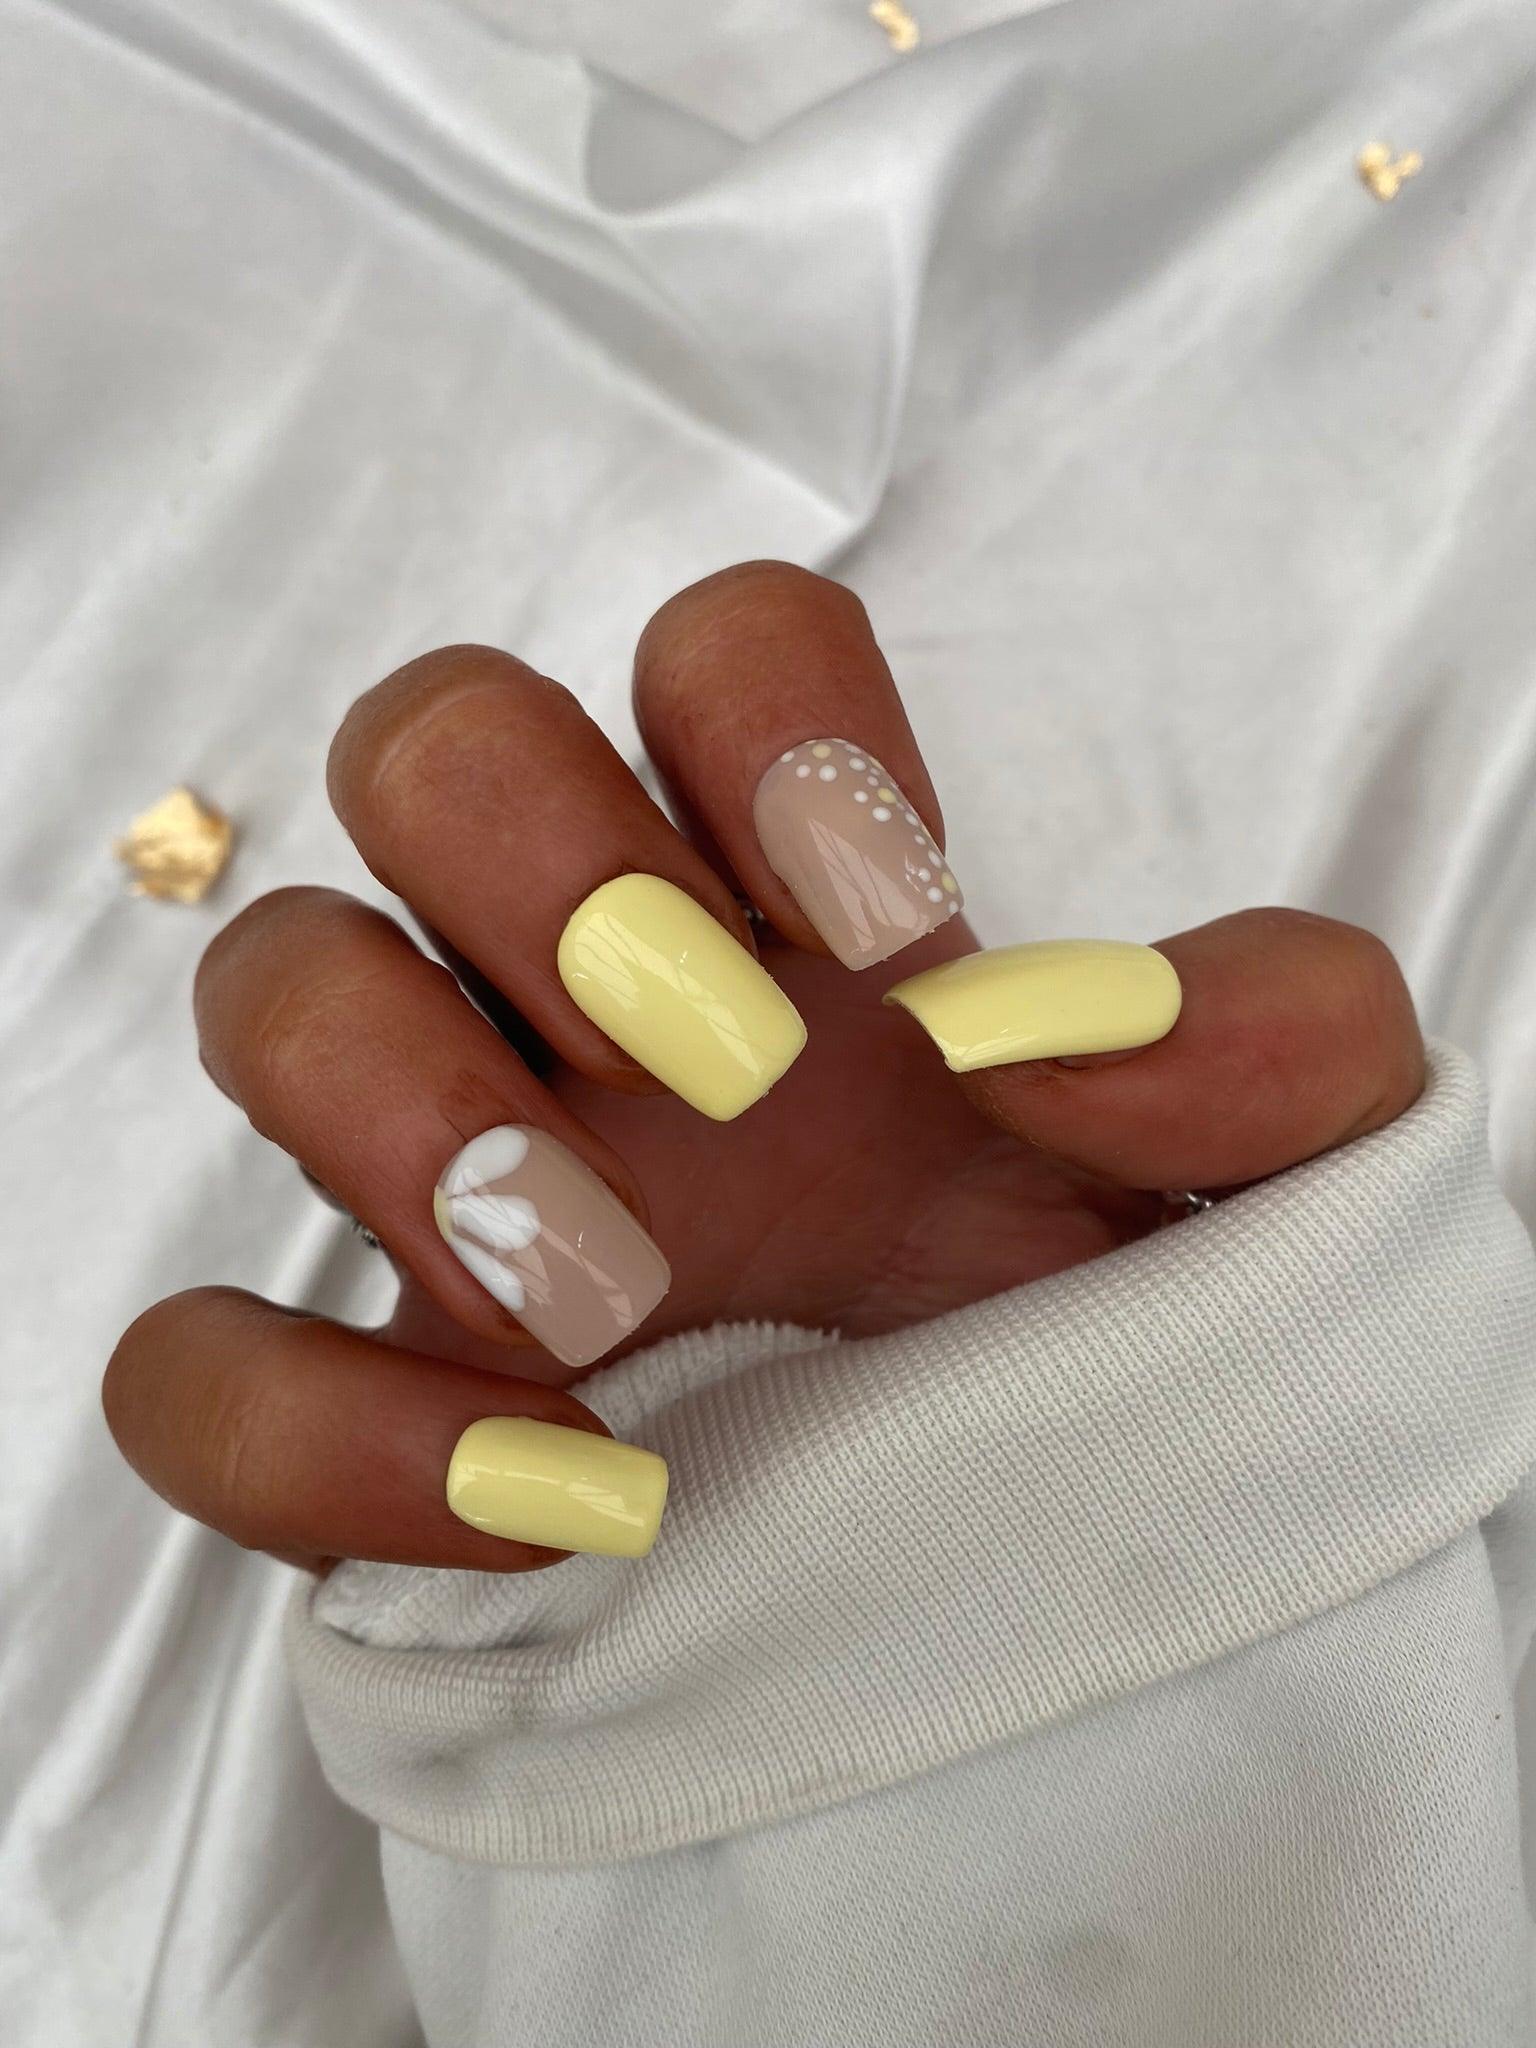 new nail set alert 💅🏽 yellow french tipssssss 💛 #nails #frenchtip #... |  french tip nails | TikTok